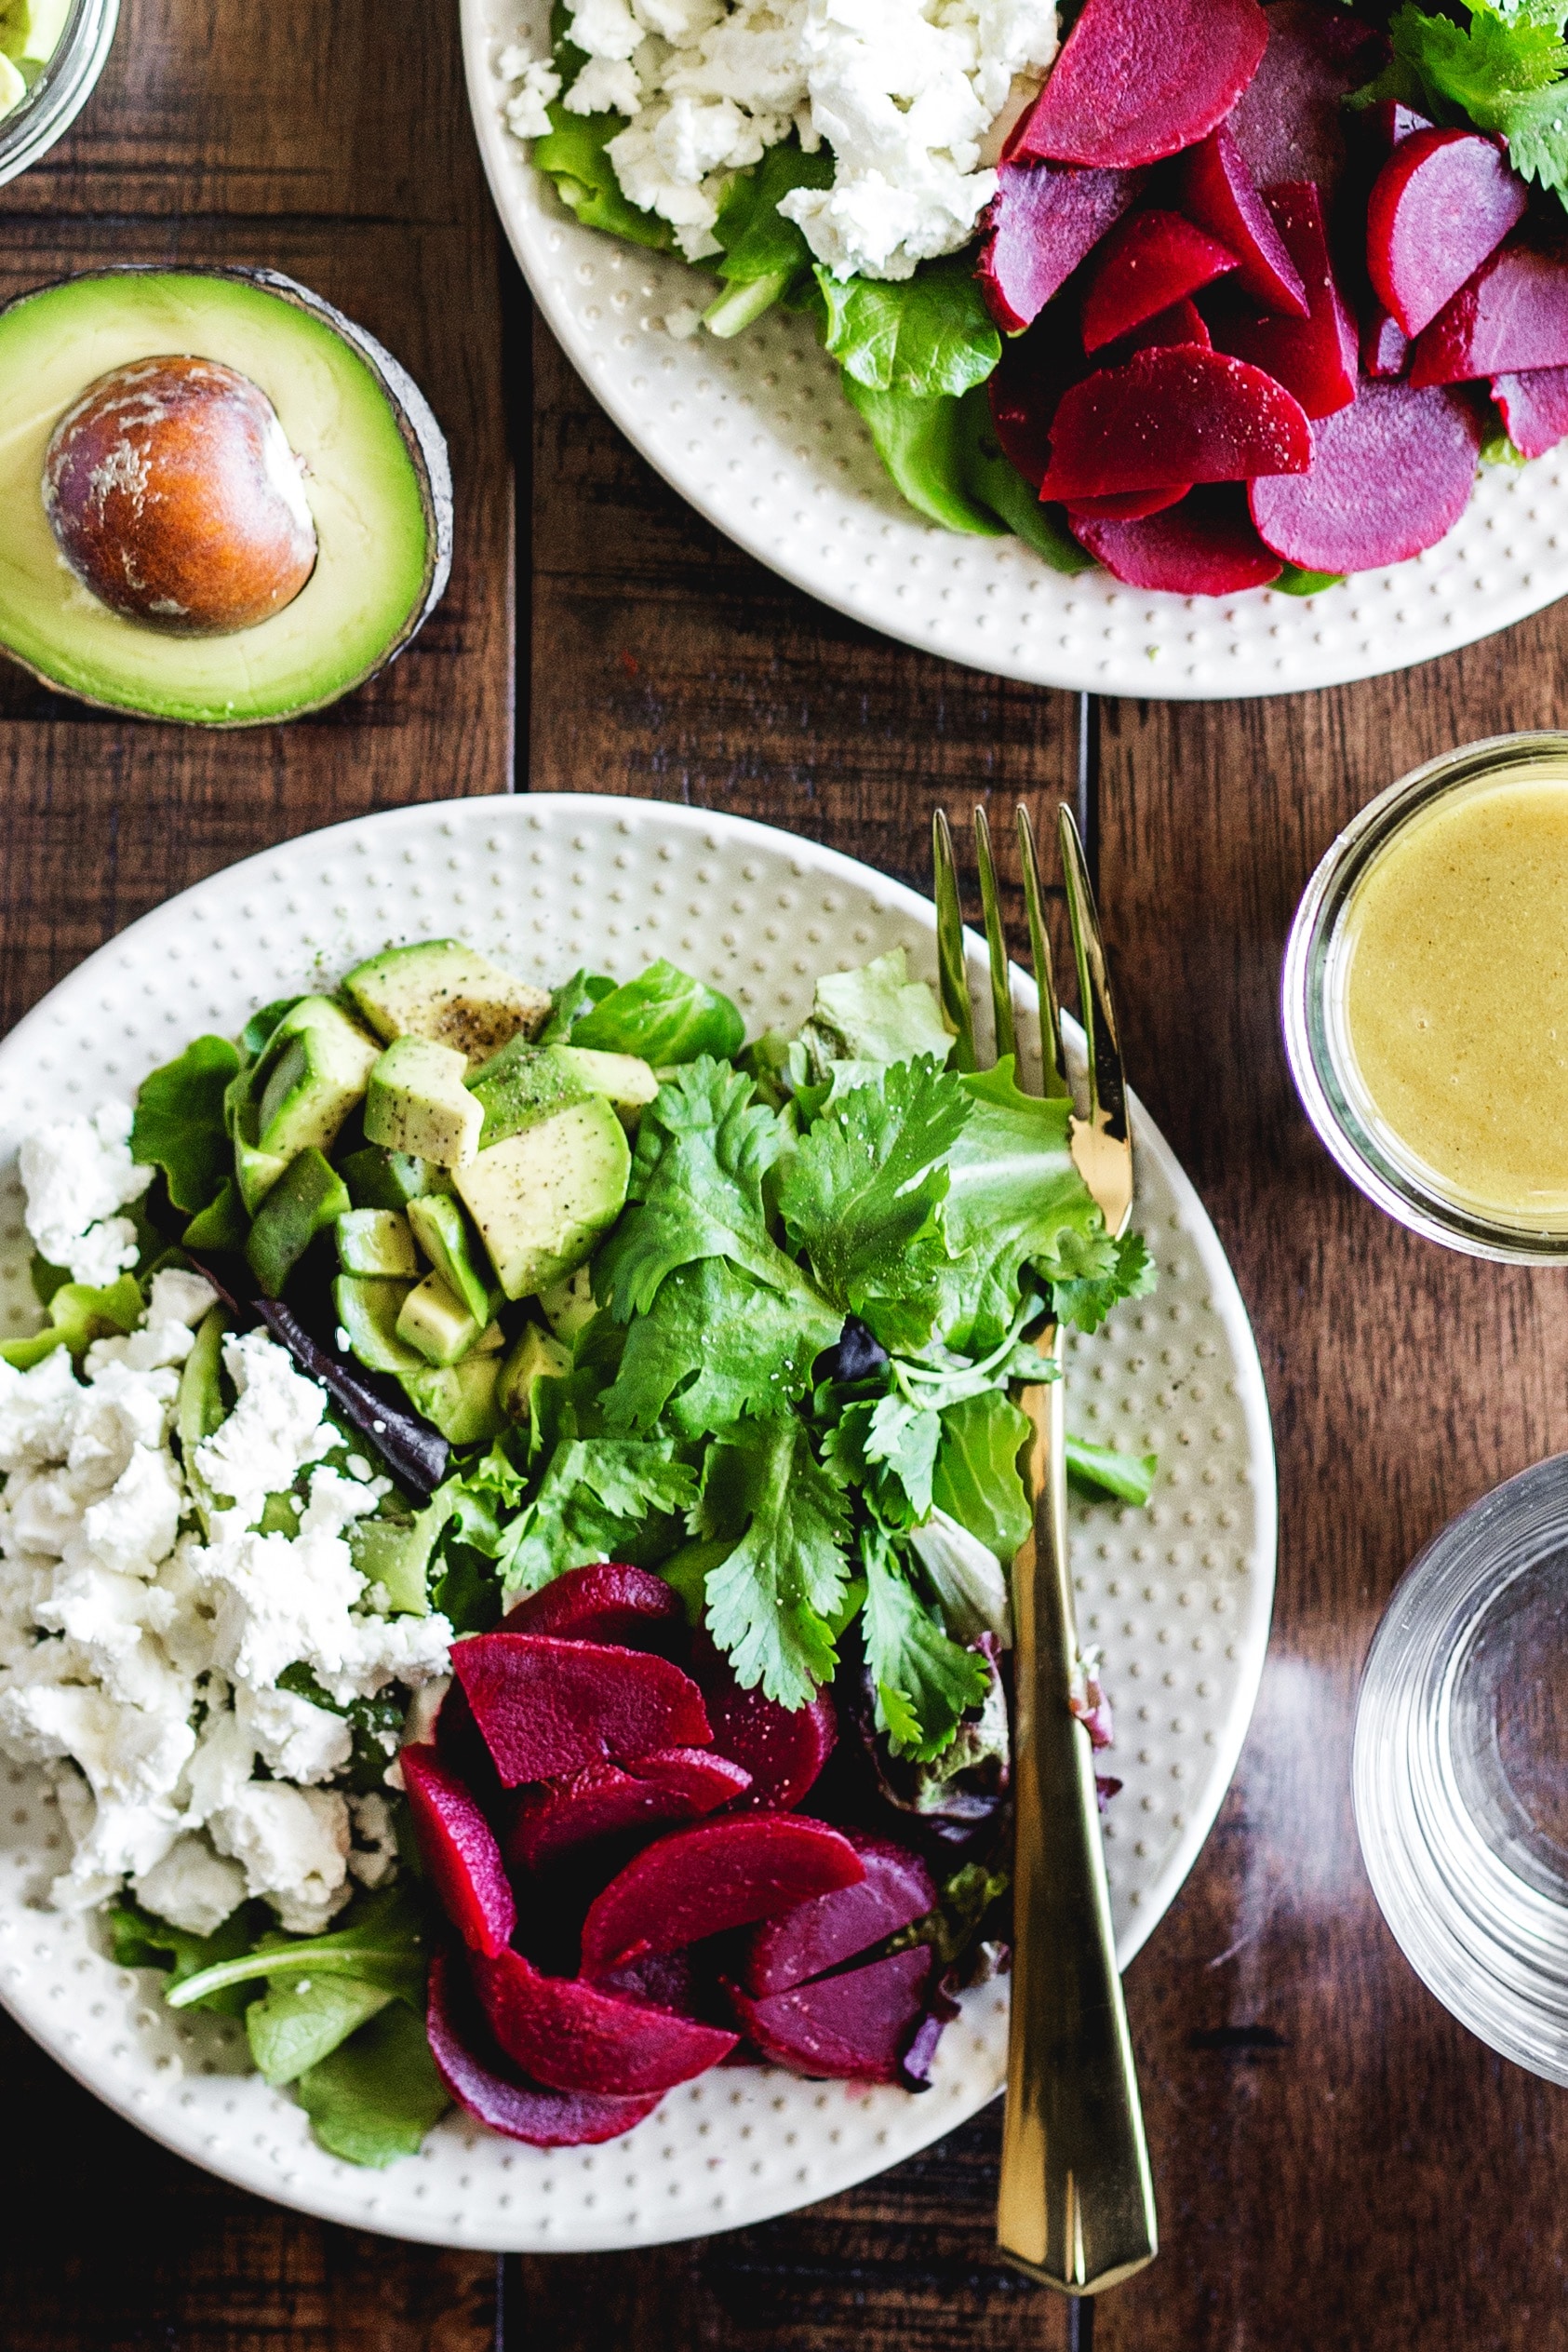 Avocado Beet and Goat Cheese Salad with simple vinaigrette- an easy and delicious addition to your next meal!